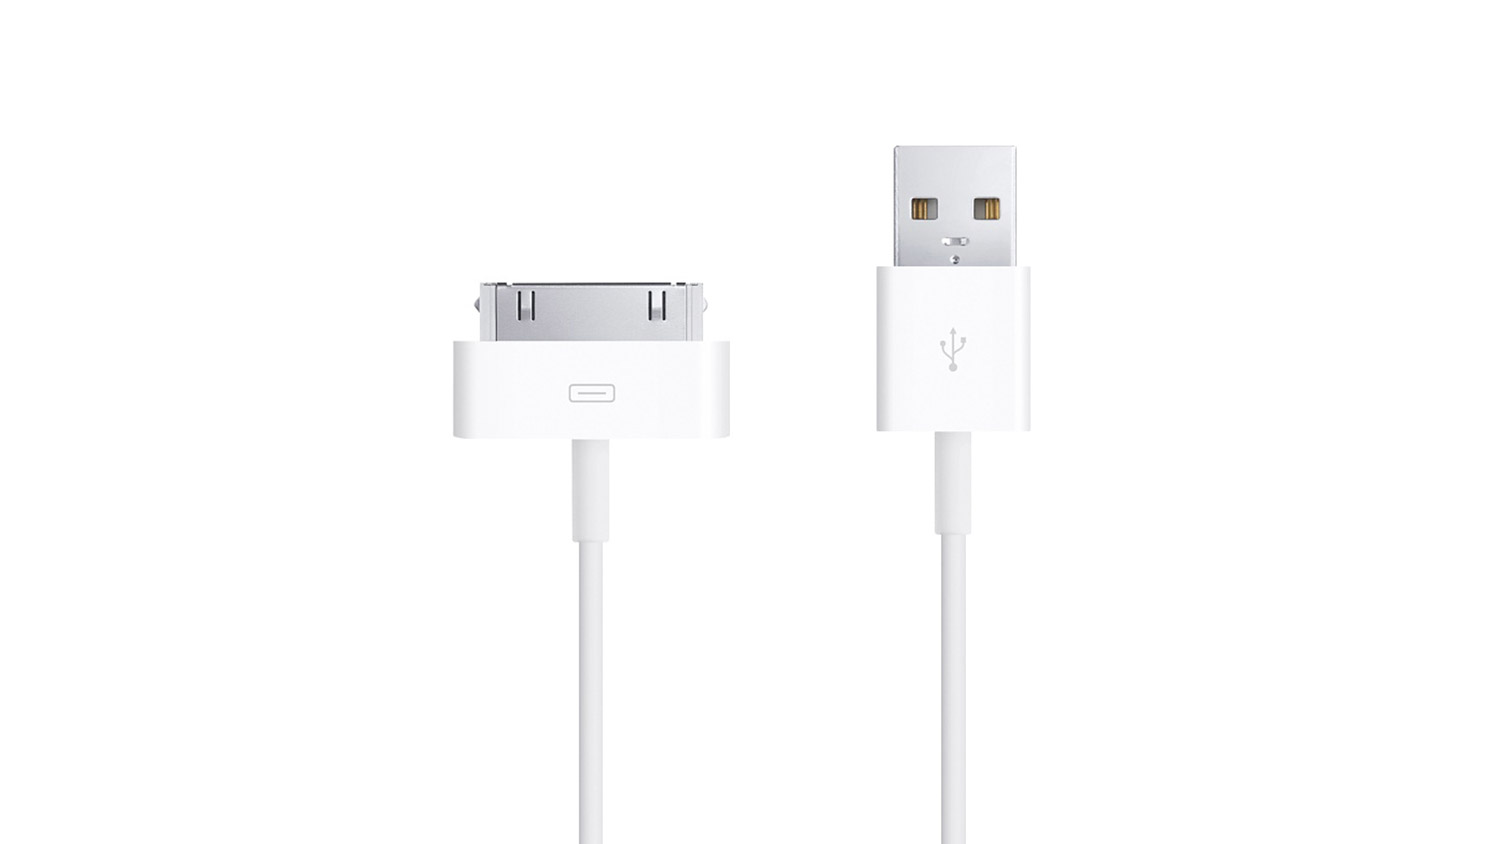 Apple's Lightning connector was introduced 10 years ago, and it may not survive the iPhone 15